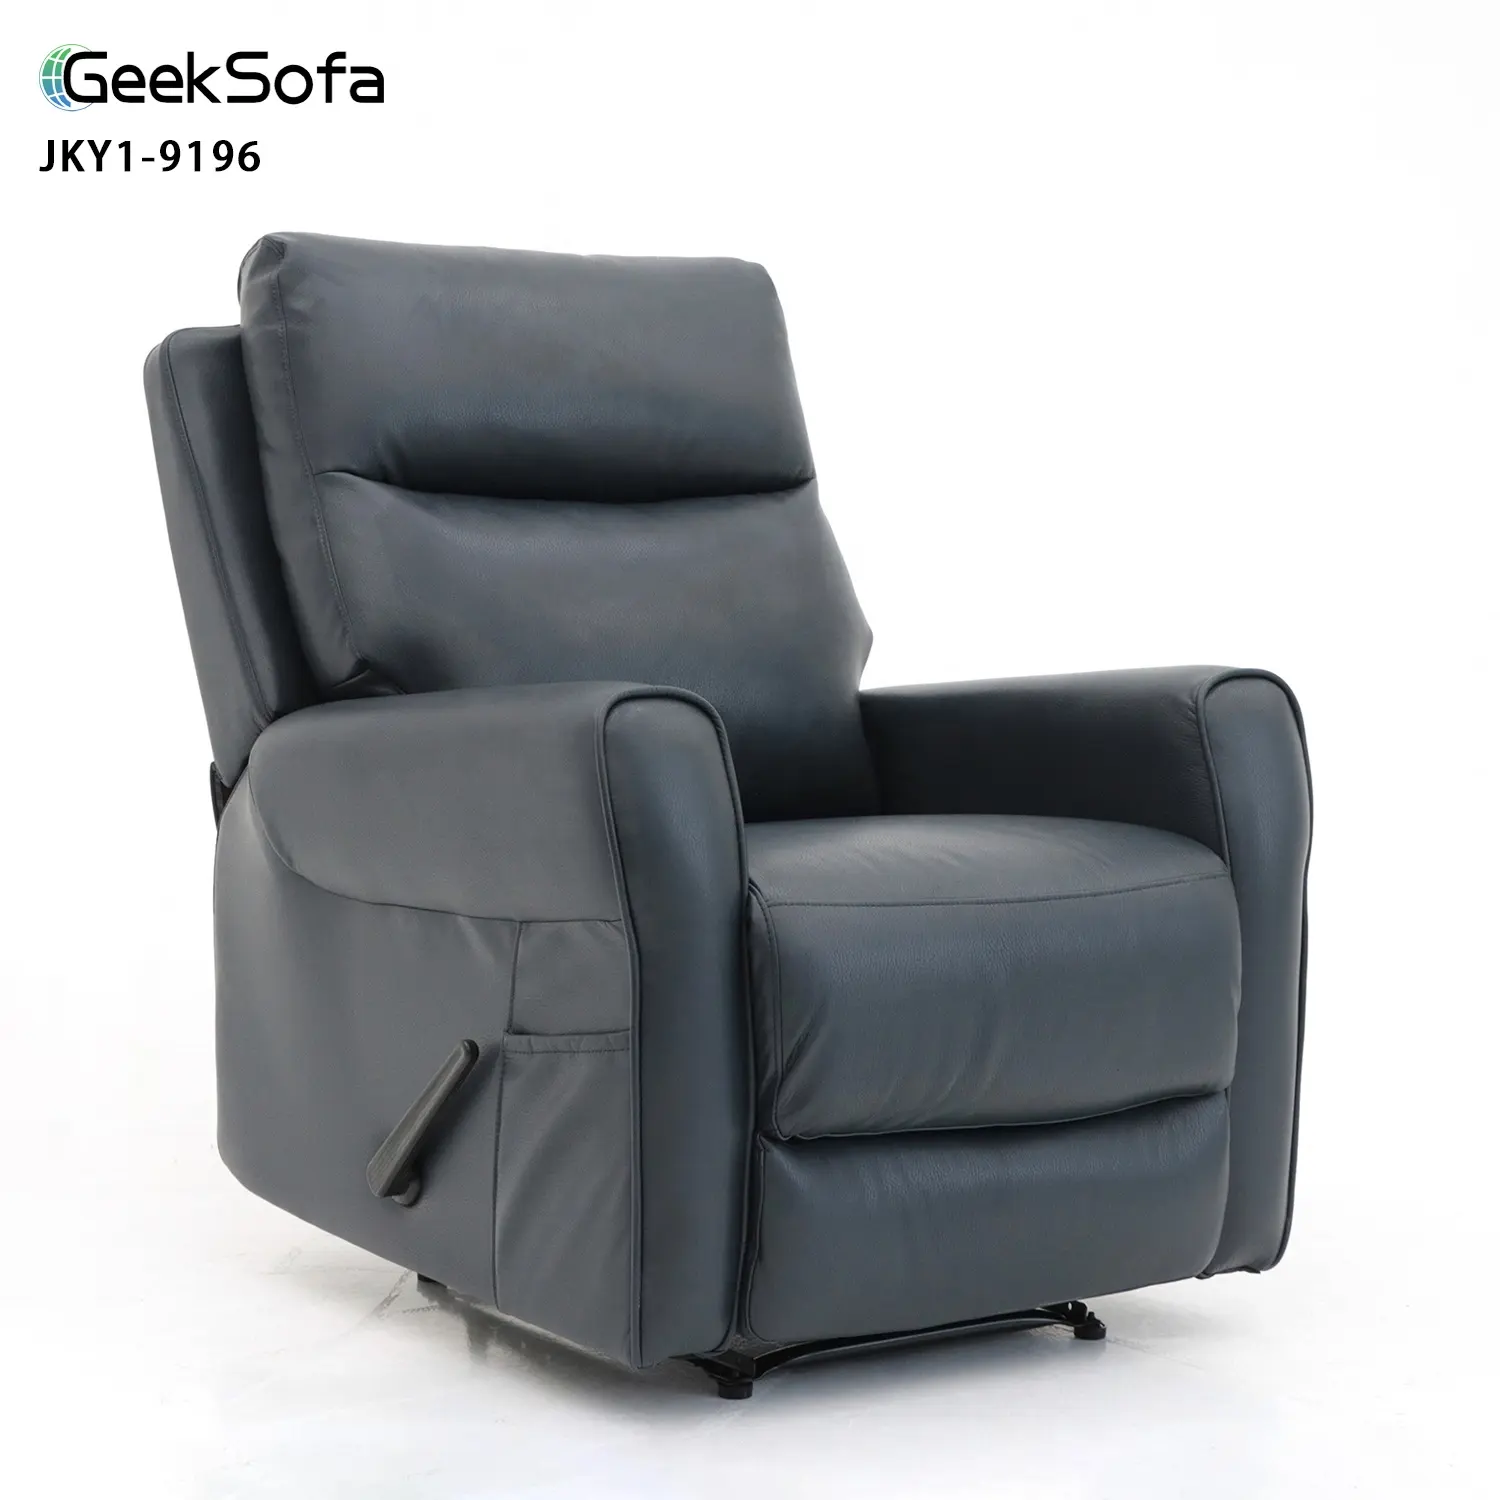 Geeksofa Factory Wholesale Lazy Boy Modern Microfiber Fabric Manual Recliner Chair for Living Room Furniture